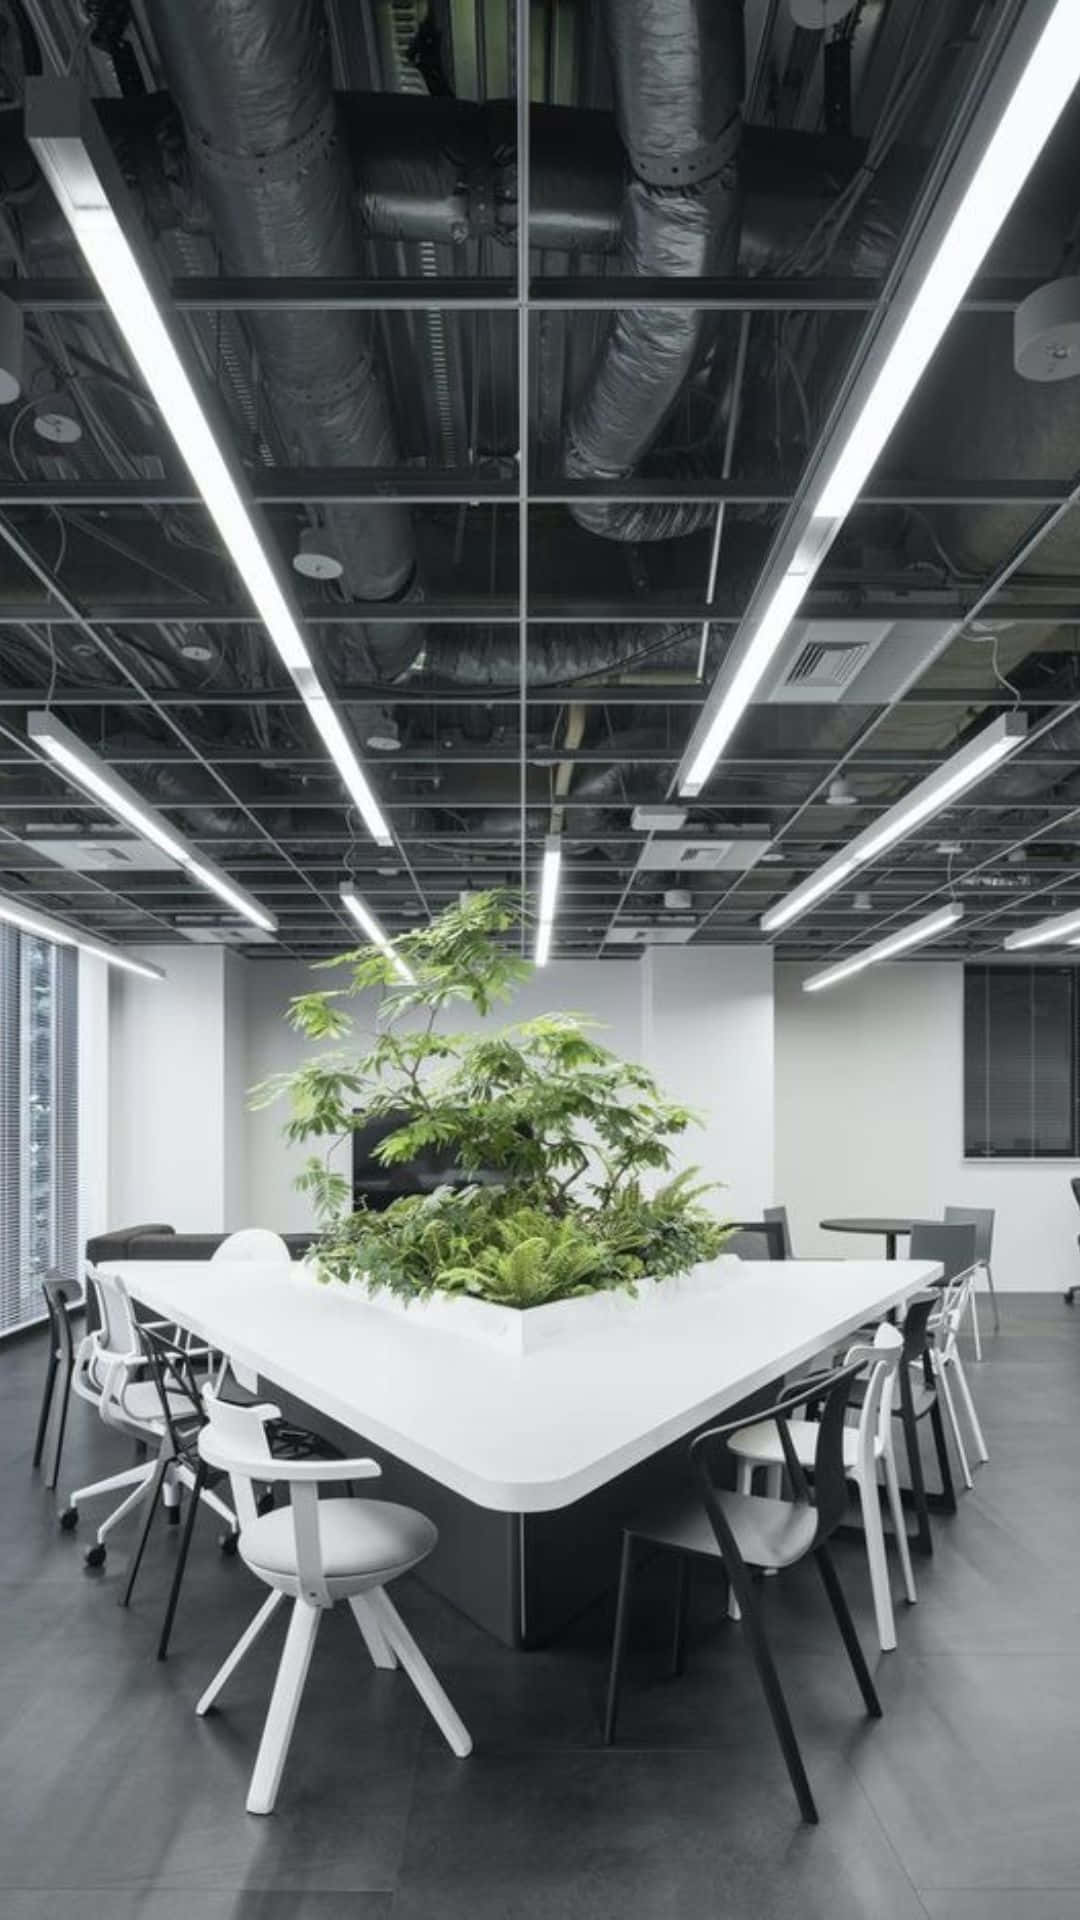 A Black And White Photo Of An Office With A Plant In The Middle